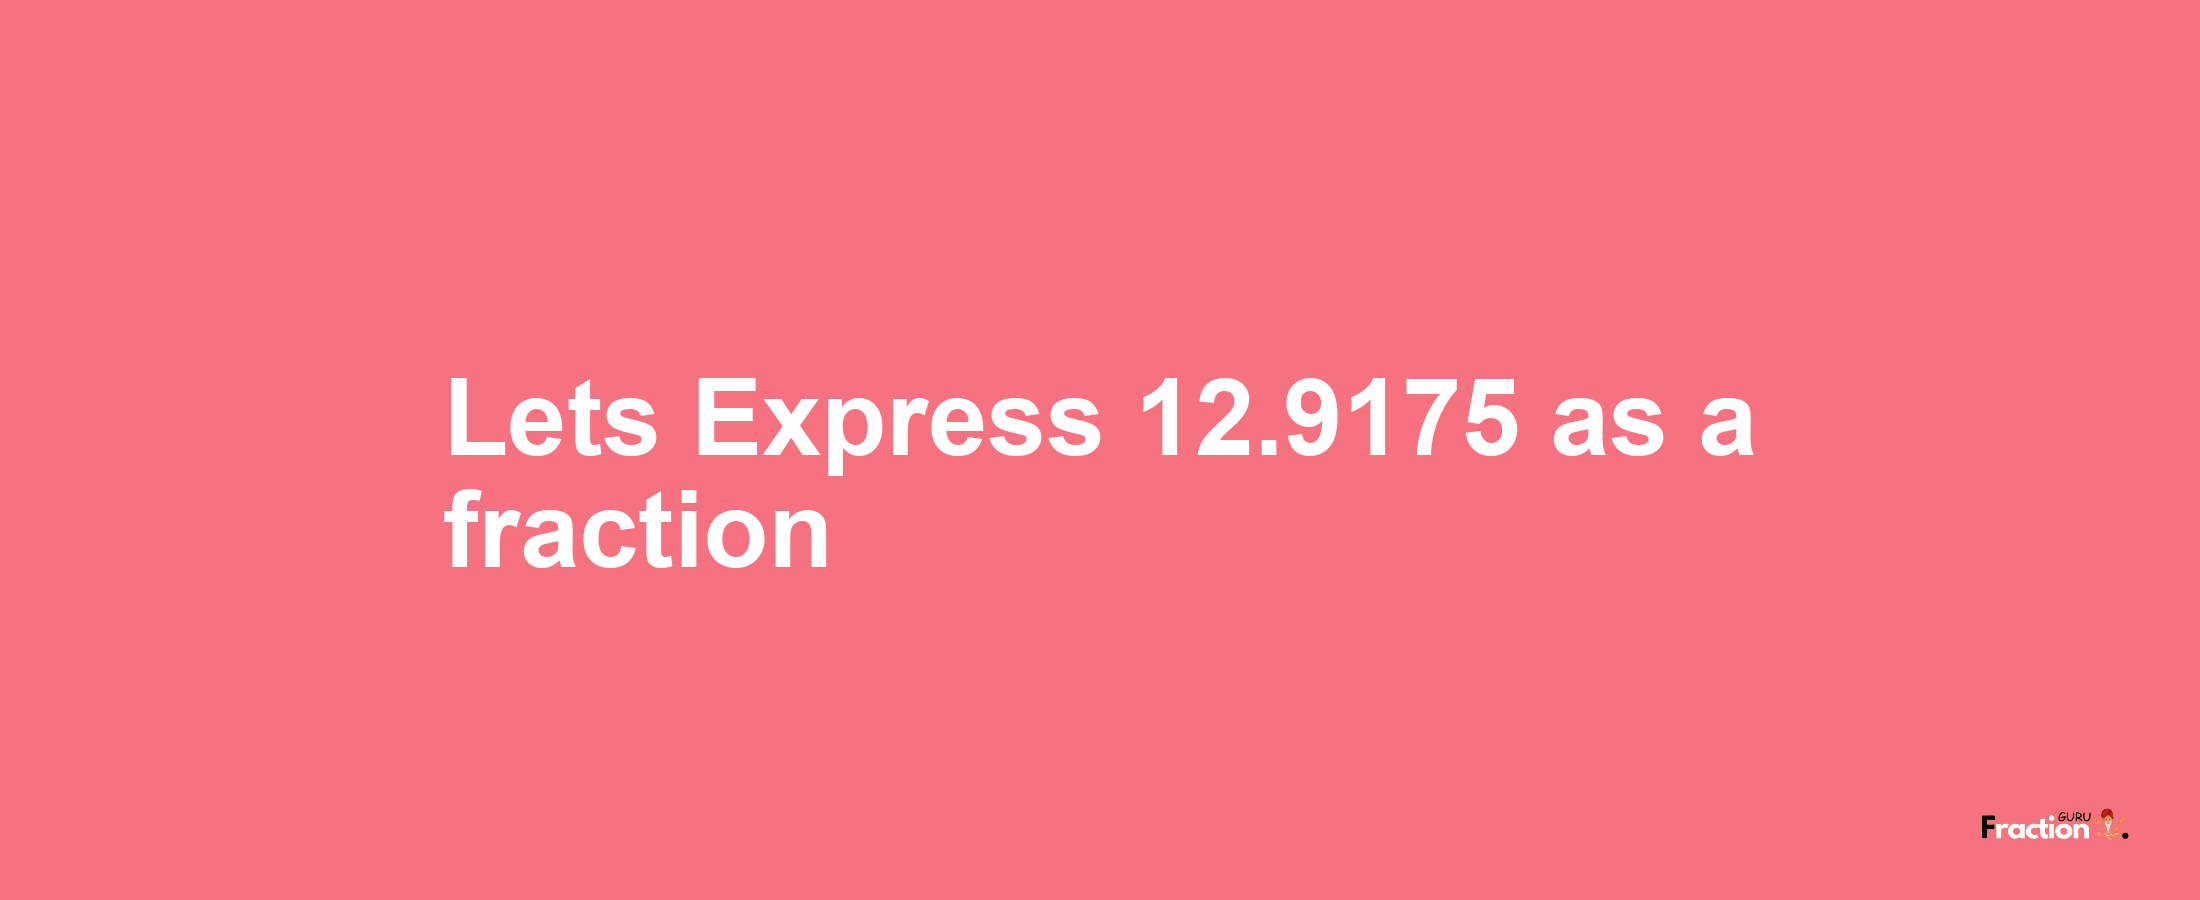 Lets Express 12.9175 as afraction